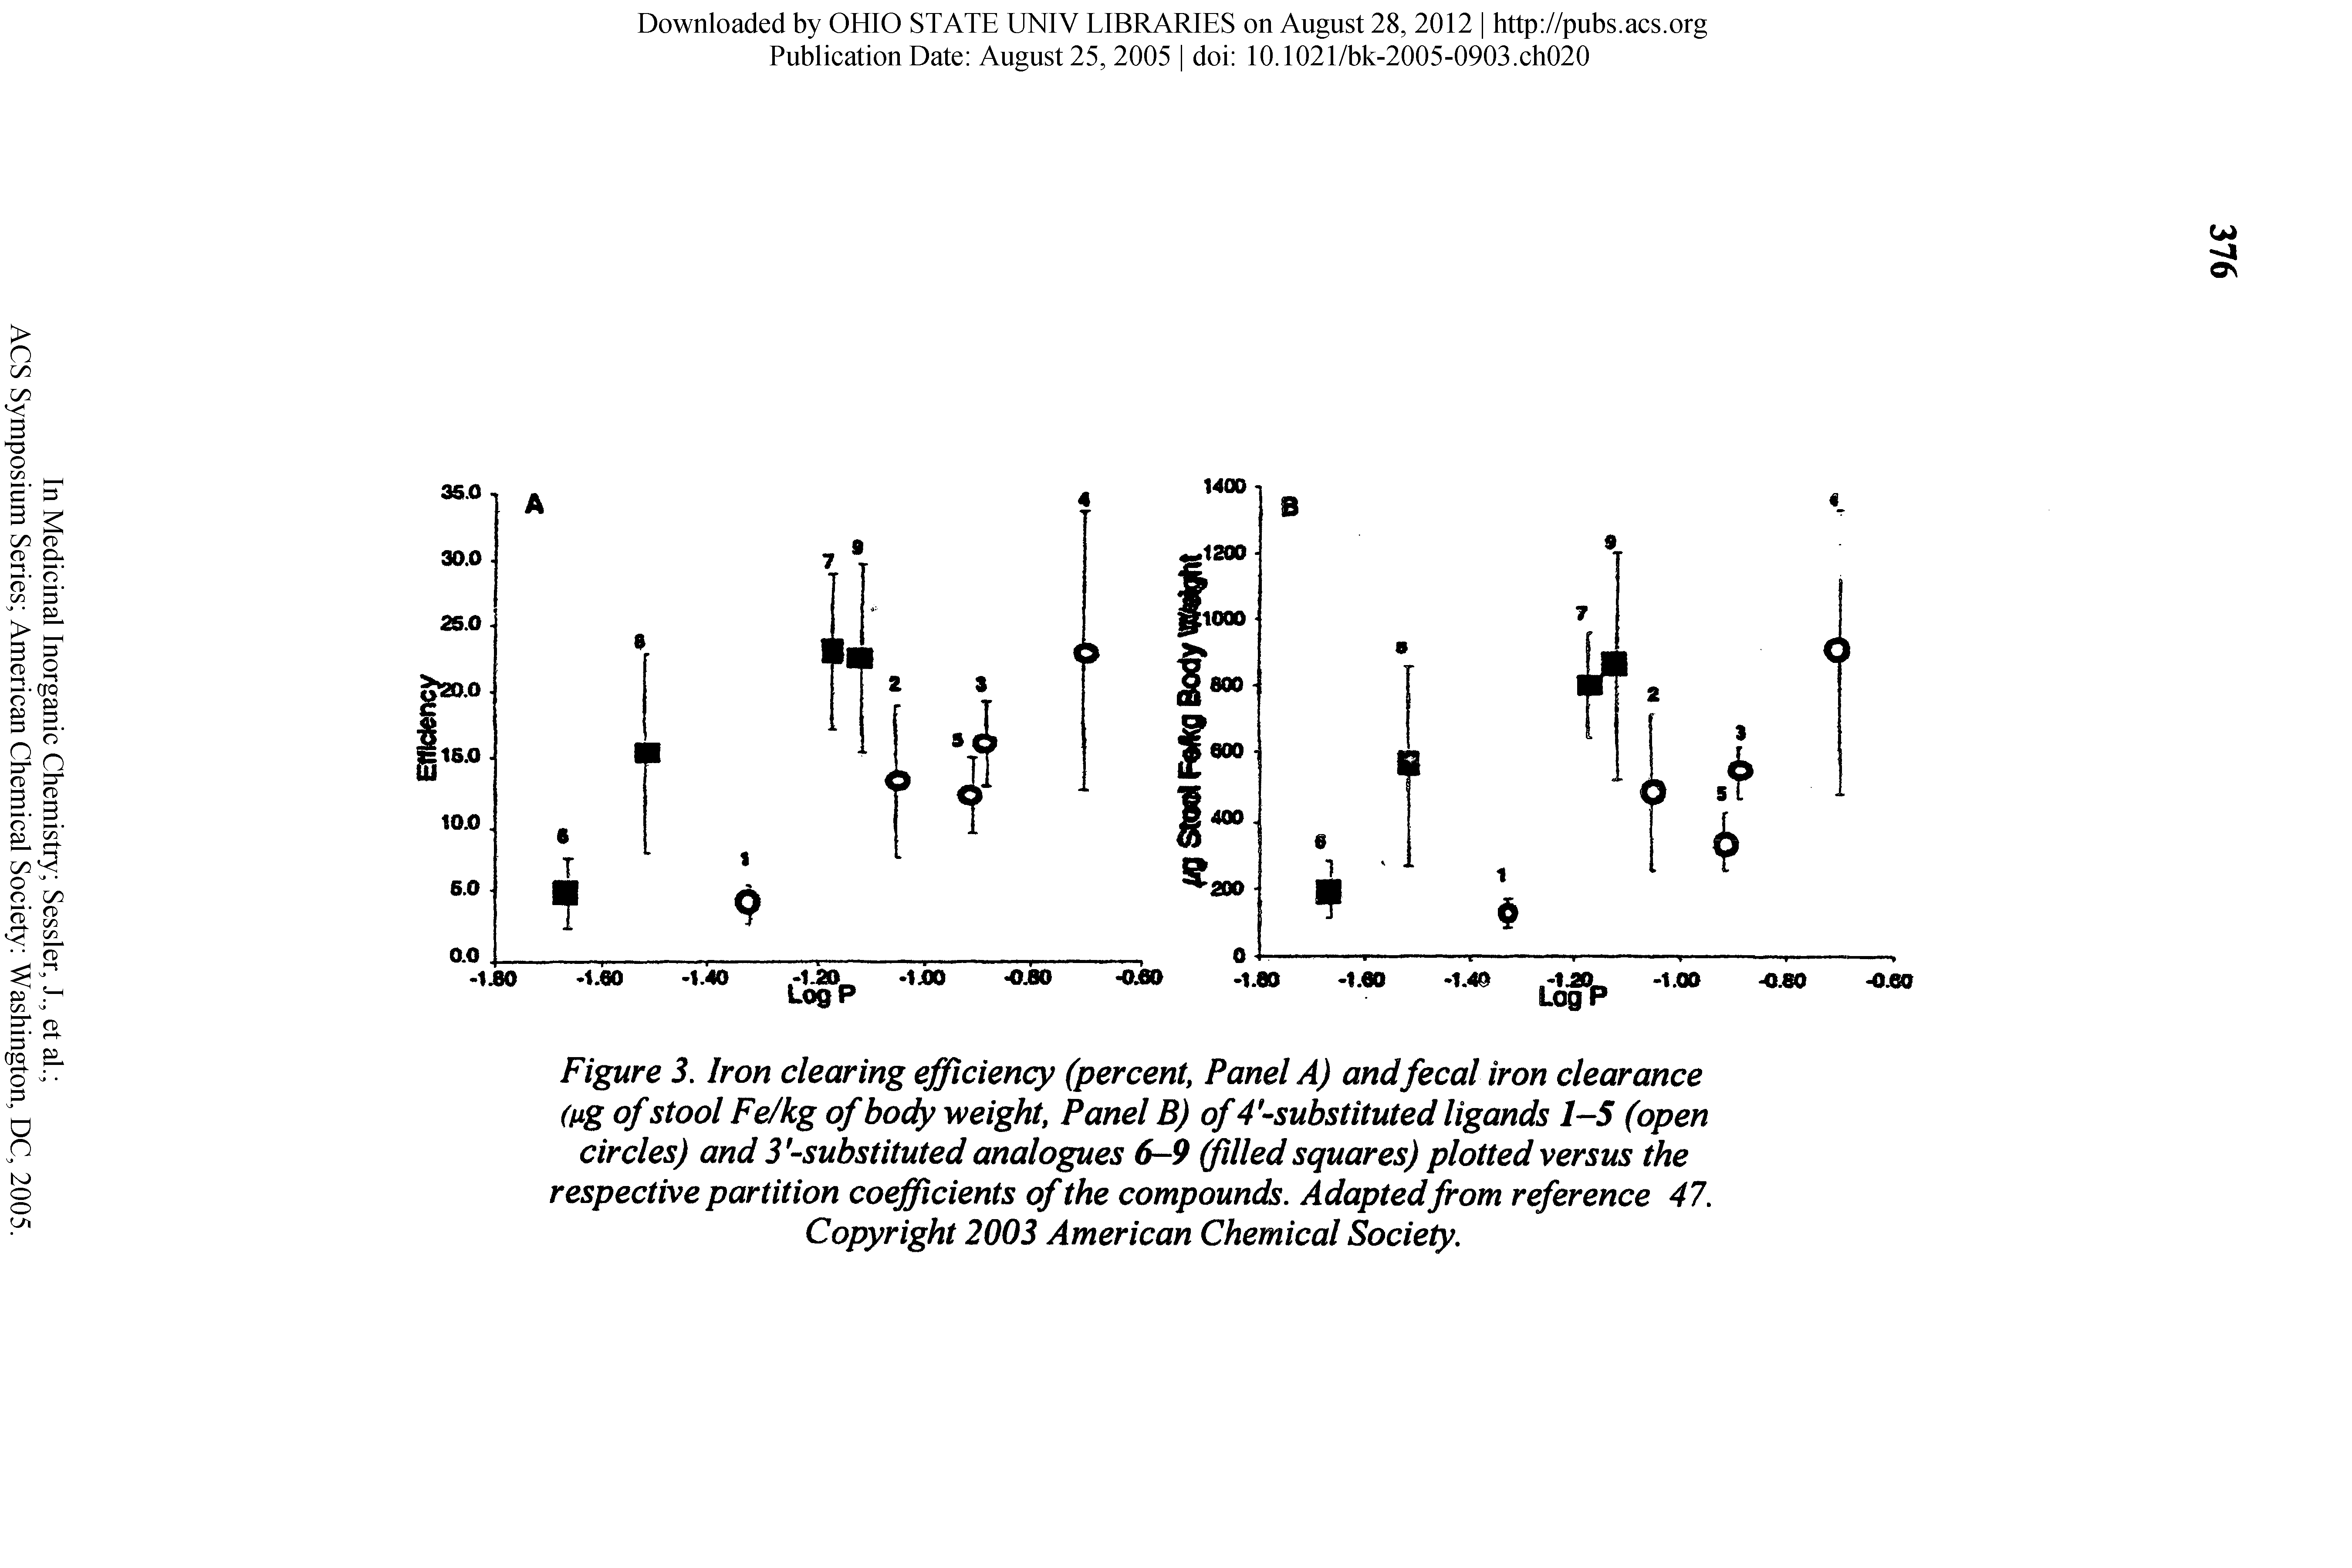 Figure 3. Iron clearing efficiency (percent, Panel A) and fecal iron clearance (tig of stool Fe/kg of body weight, Panel B) of 4 -substituted ligands IS (open circles) and 3 -substituted analogues 6-9 (filled squares) plotted versus the respective partition coefficients of the compounds. Adaptedfrom reference 47. Copyright 2003 American Chemical Society.